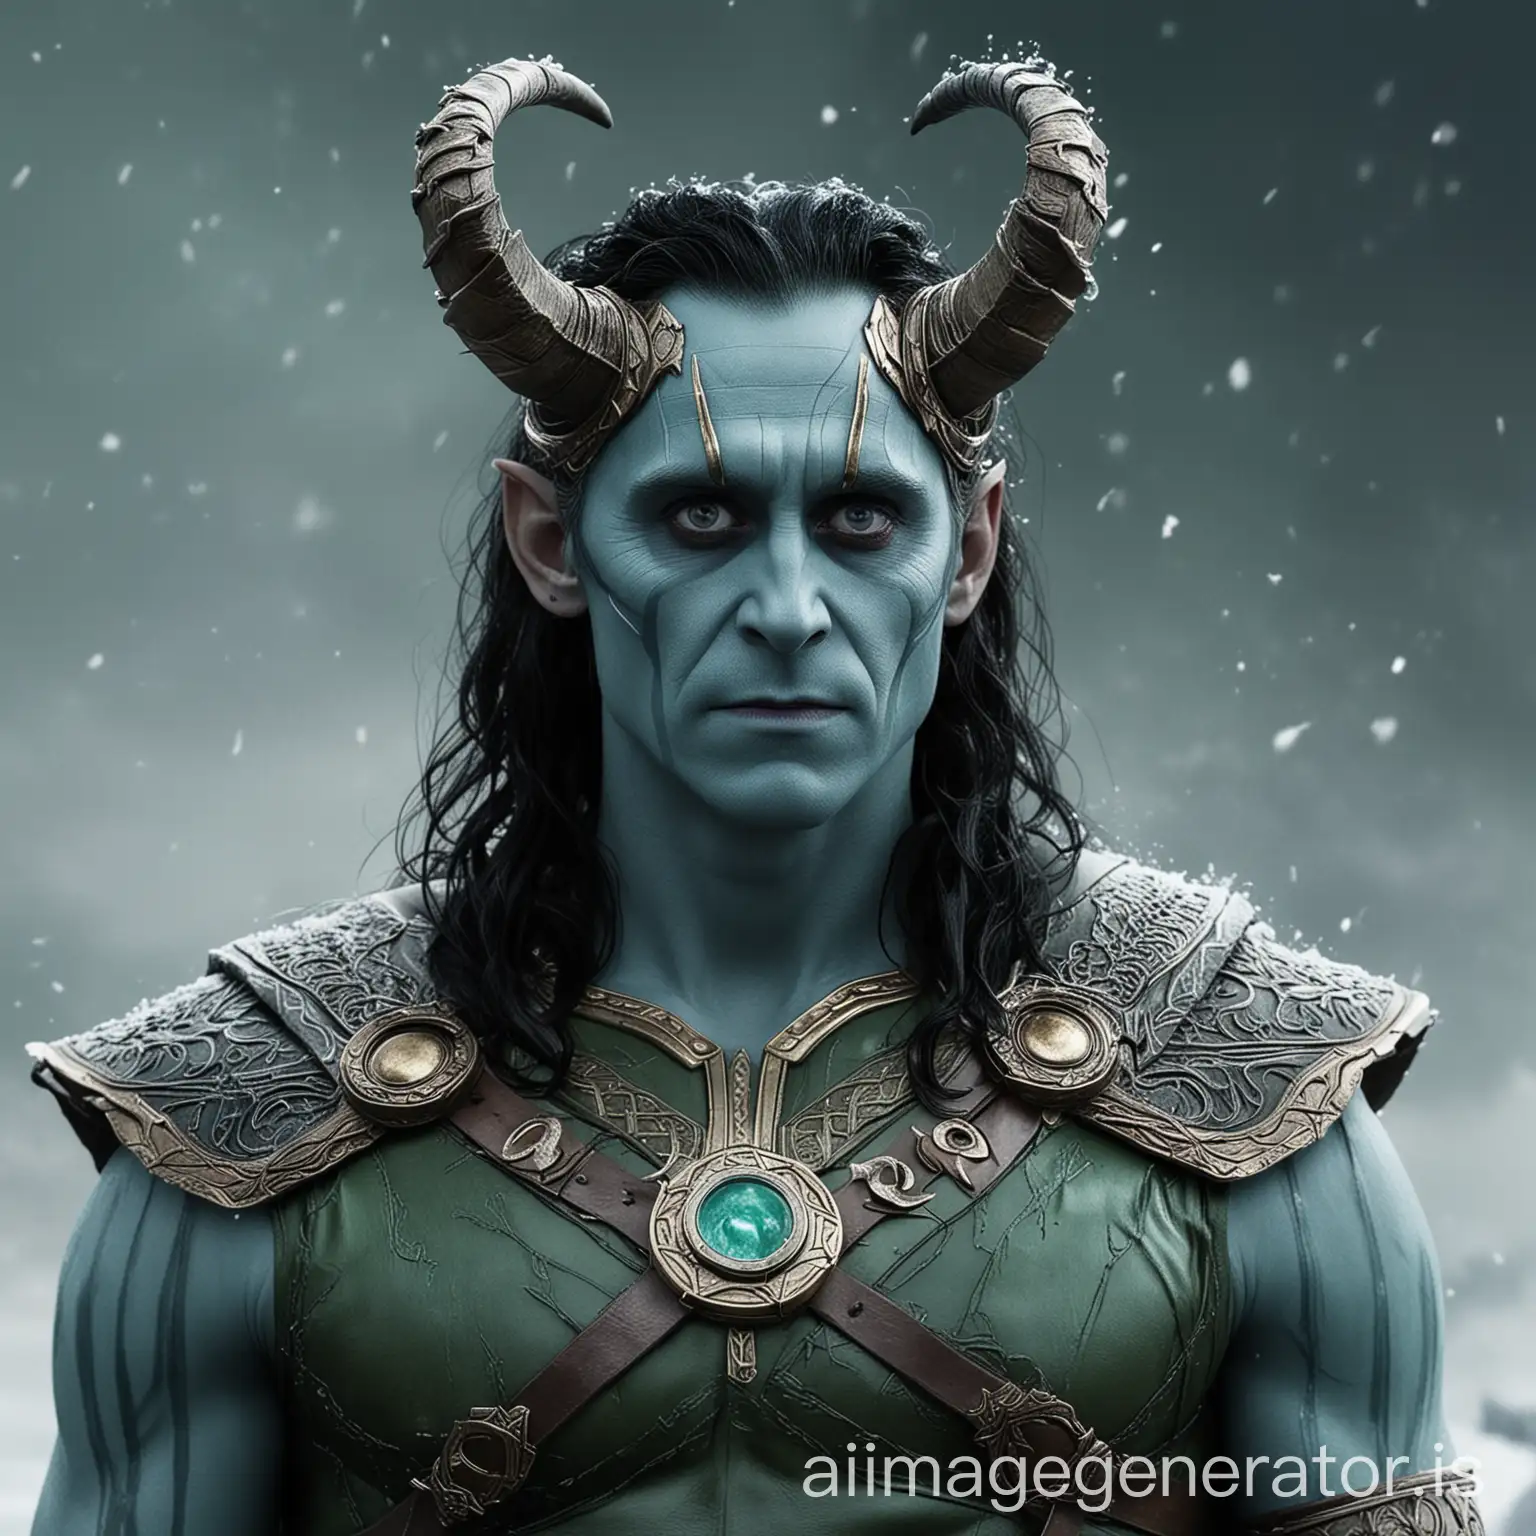 Loki as a frost giant with a ring on his head and stomach and small horns on his forehead